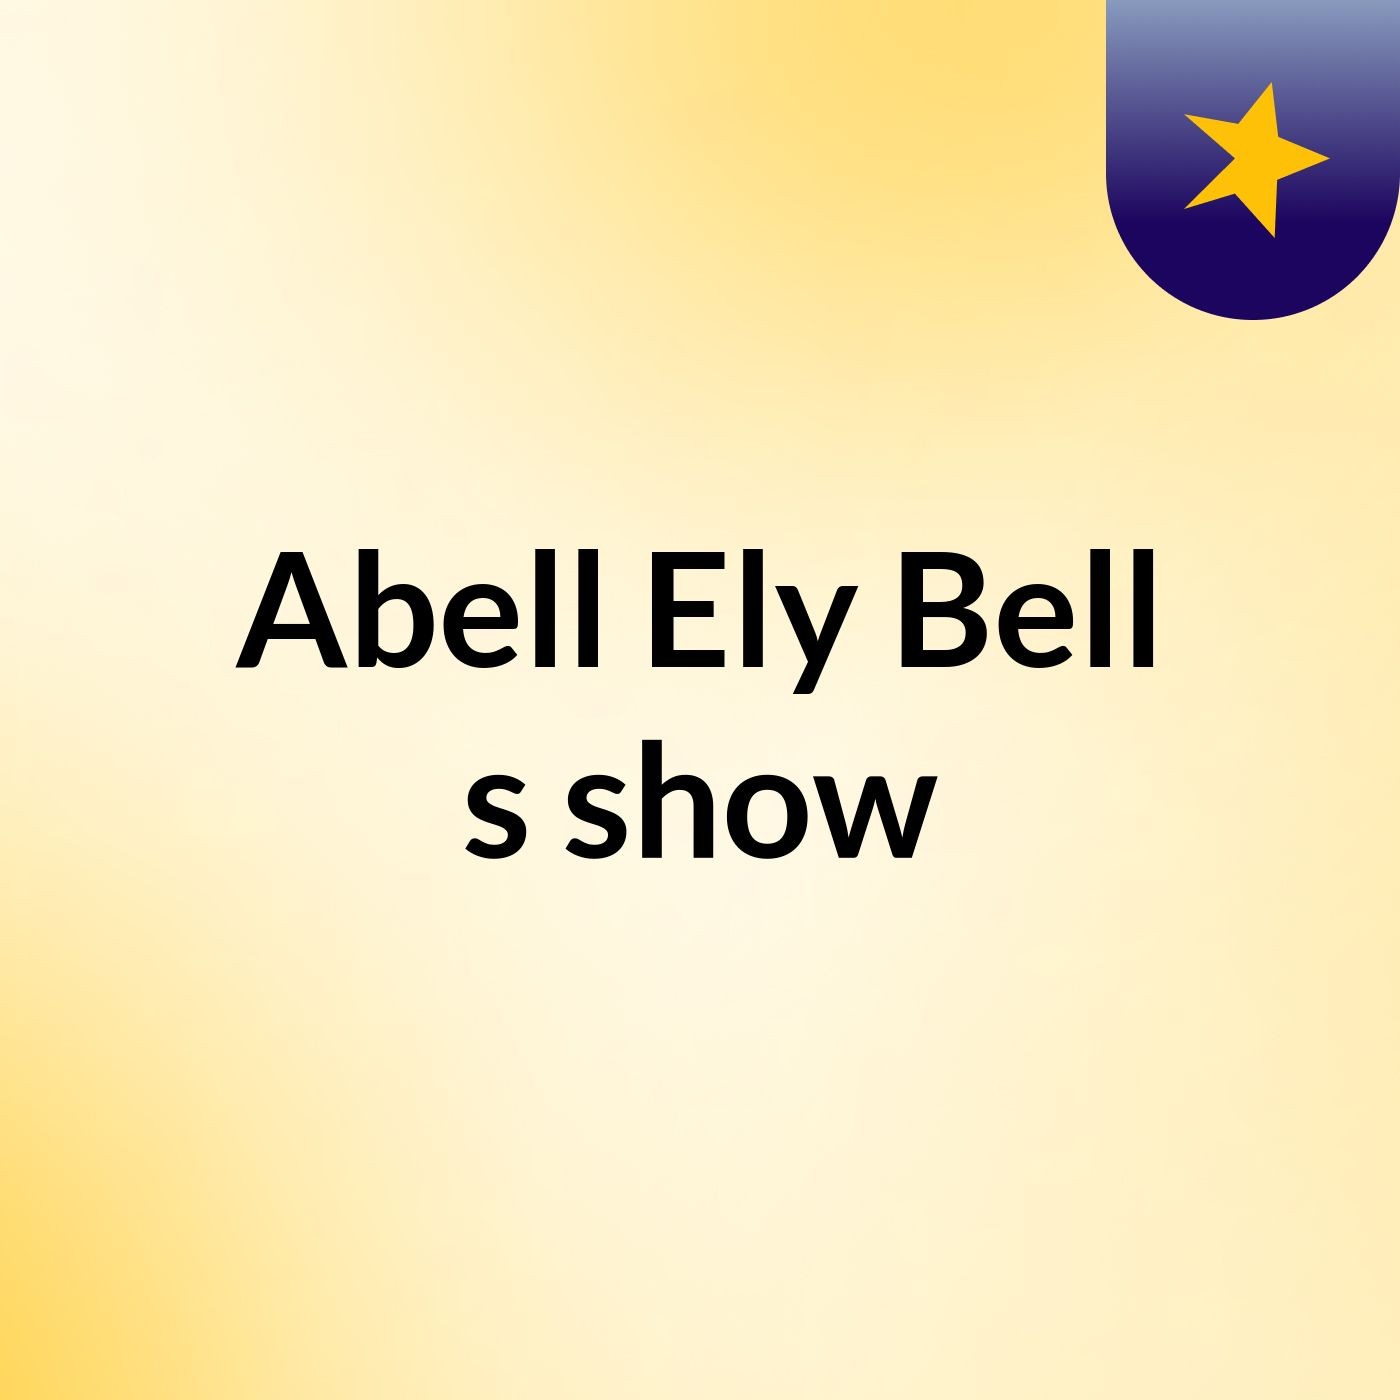 Abell Ely Bell's show